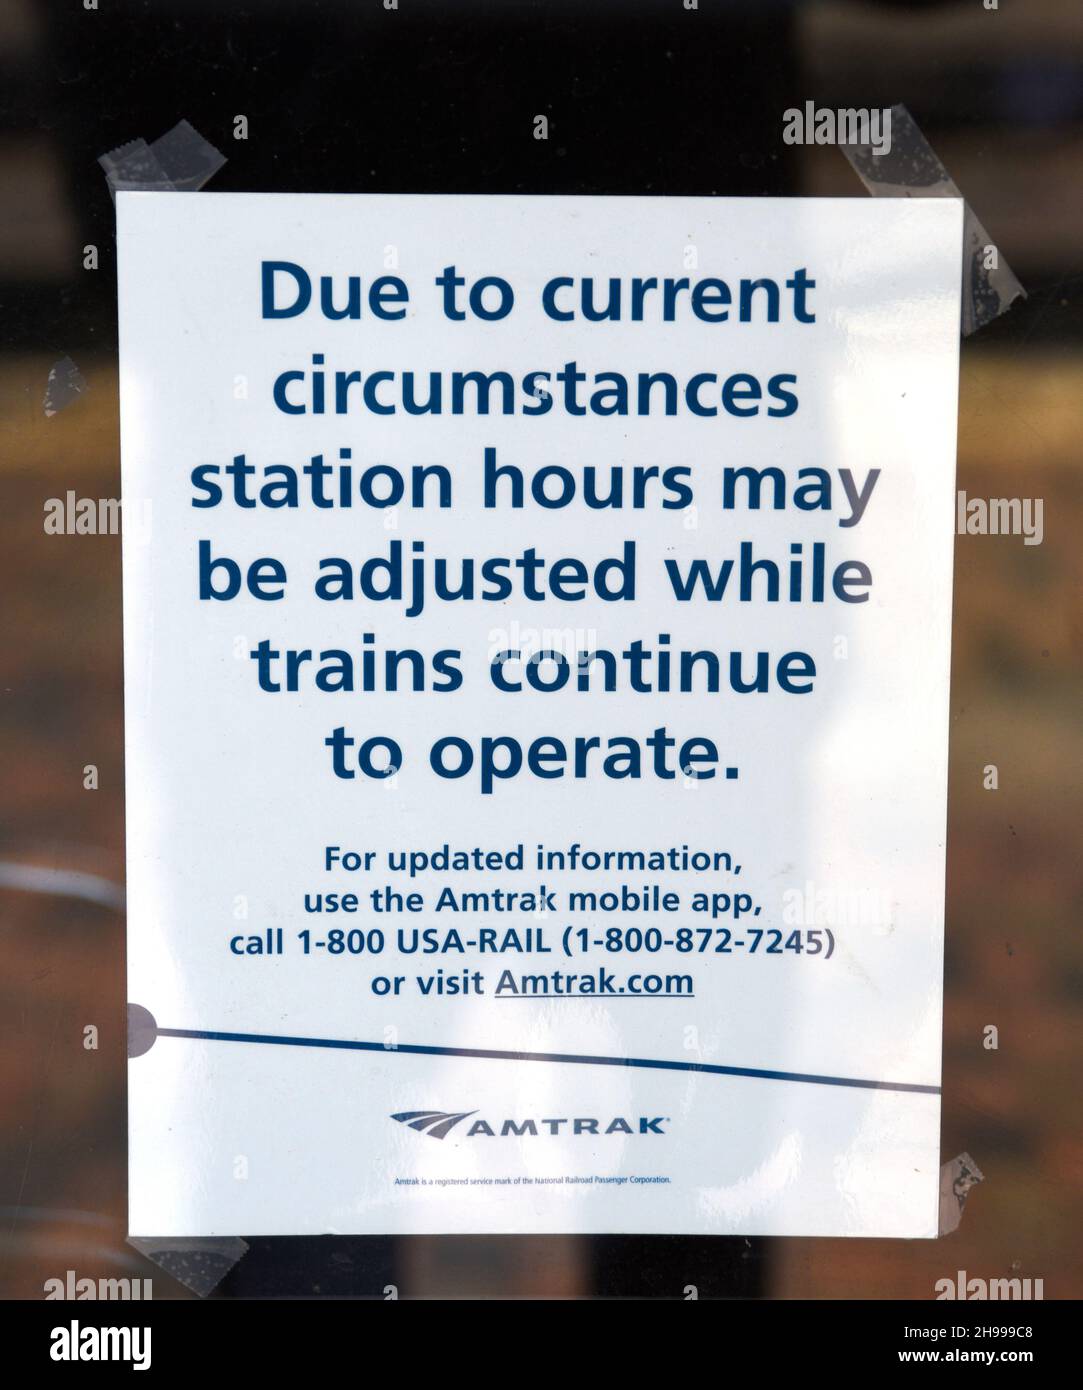 A sign posted on the door of the Amtrak train station in Lamy, New Mexico, advises of possible service changes caused by the pandemic. Stock Photo